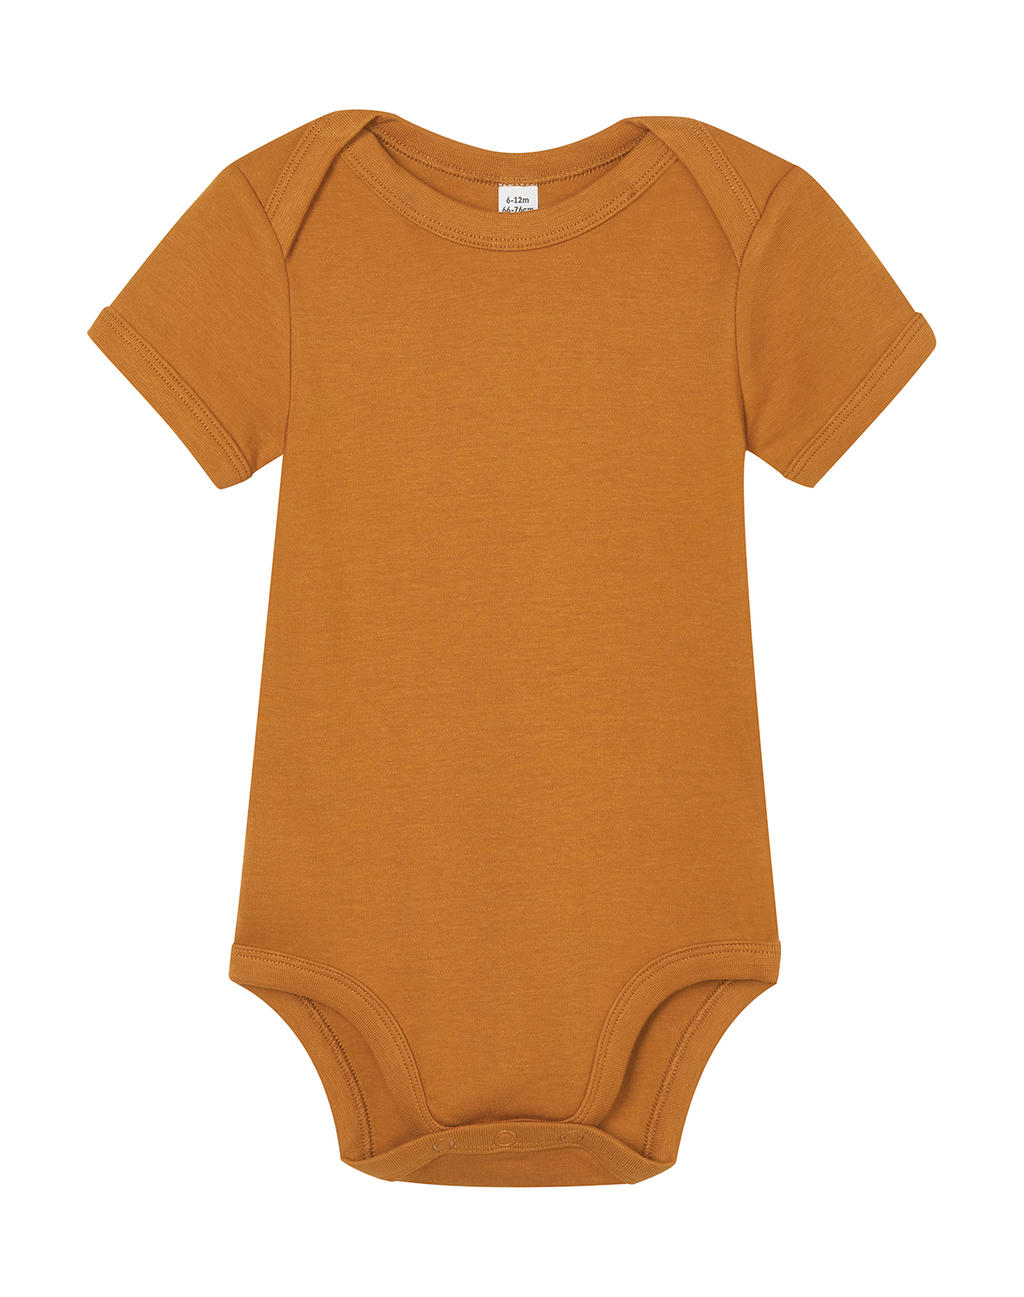  Baby Bodysuit in Farbe Toffee